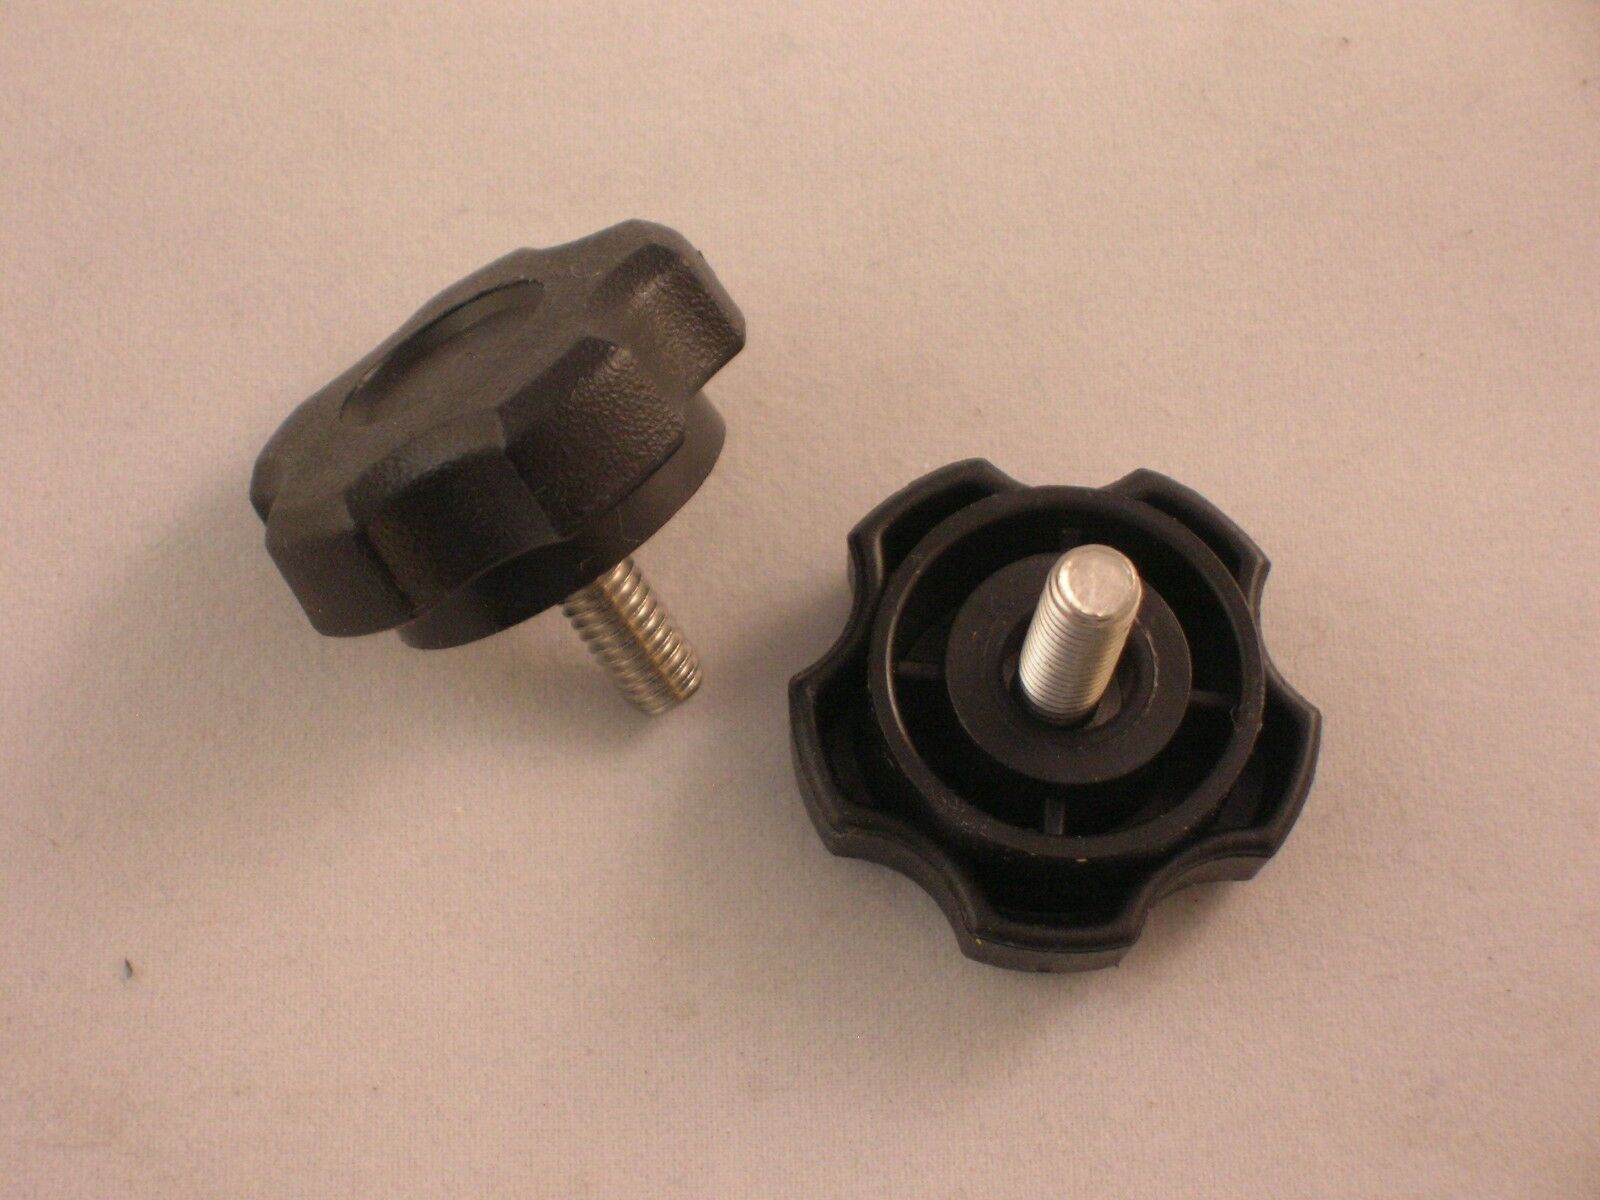 Lowrance 000-10467-001 Lowrancer Gimbal Knobs G2 HDS for sale online 